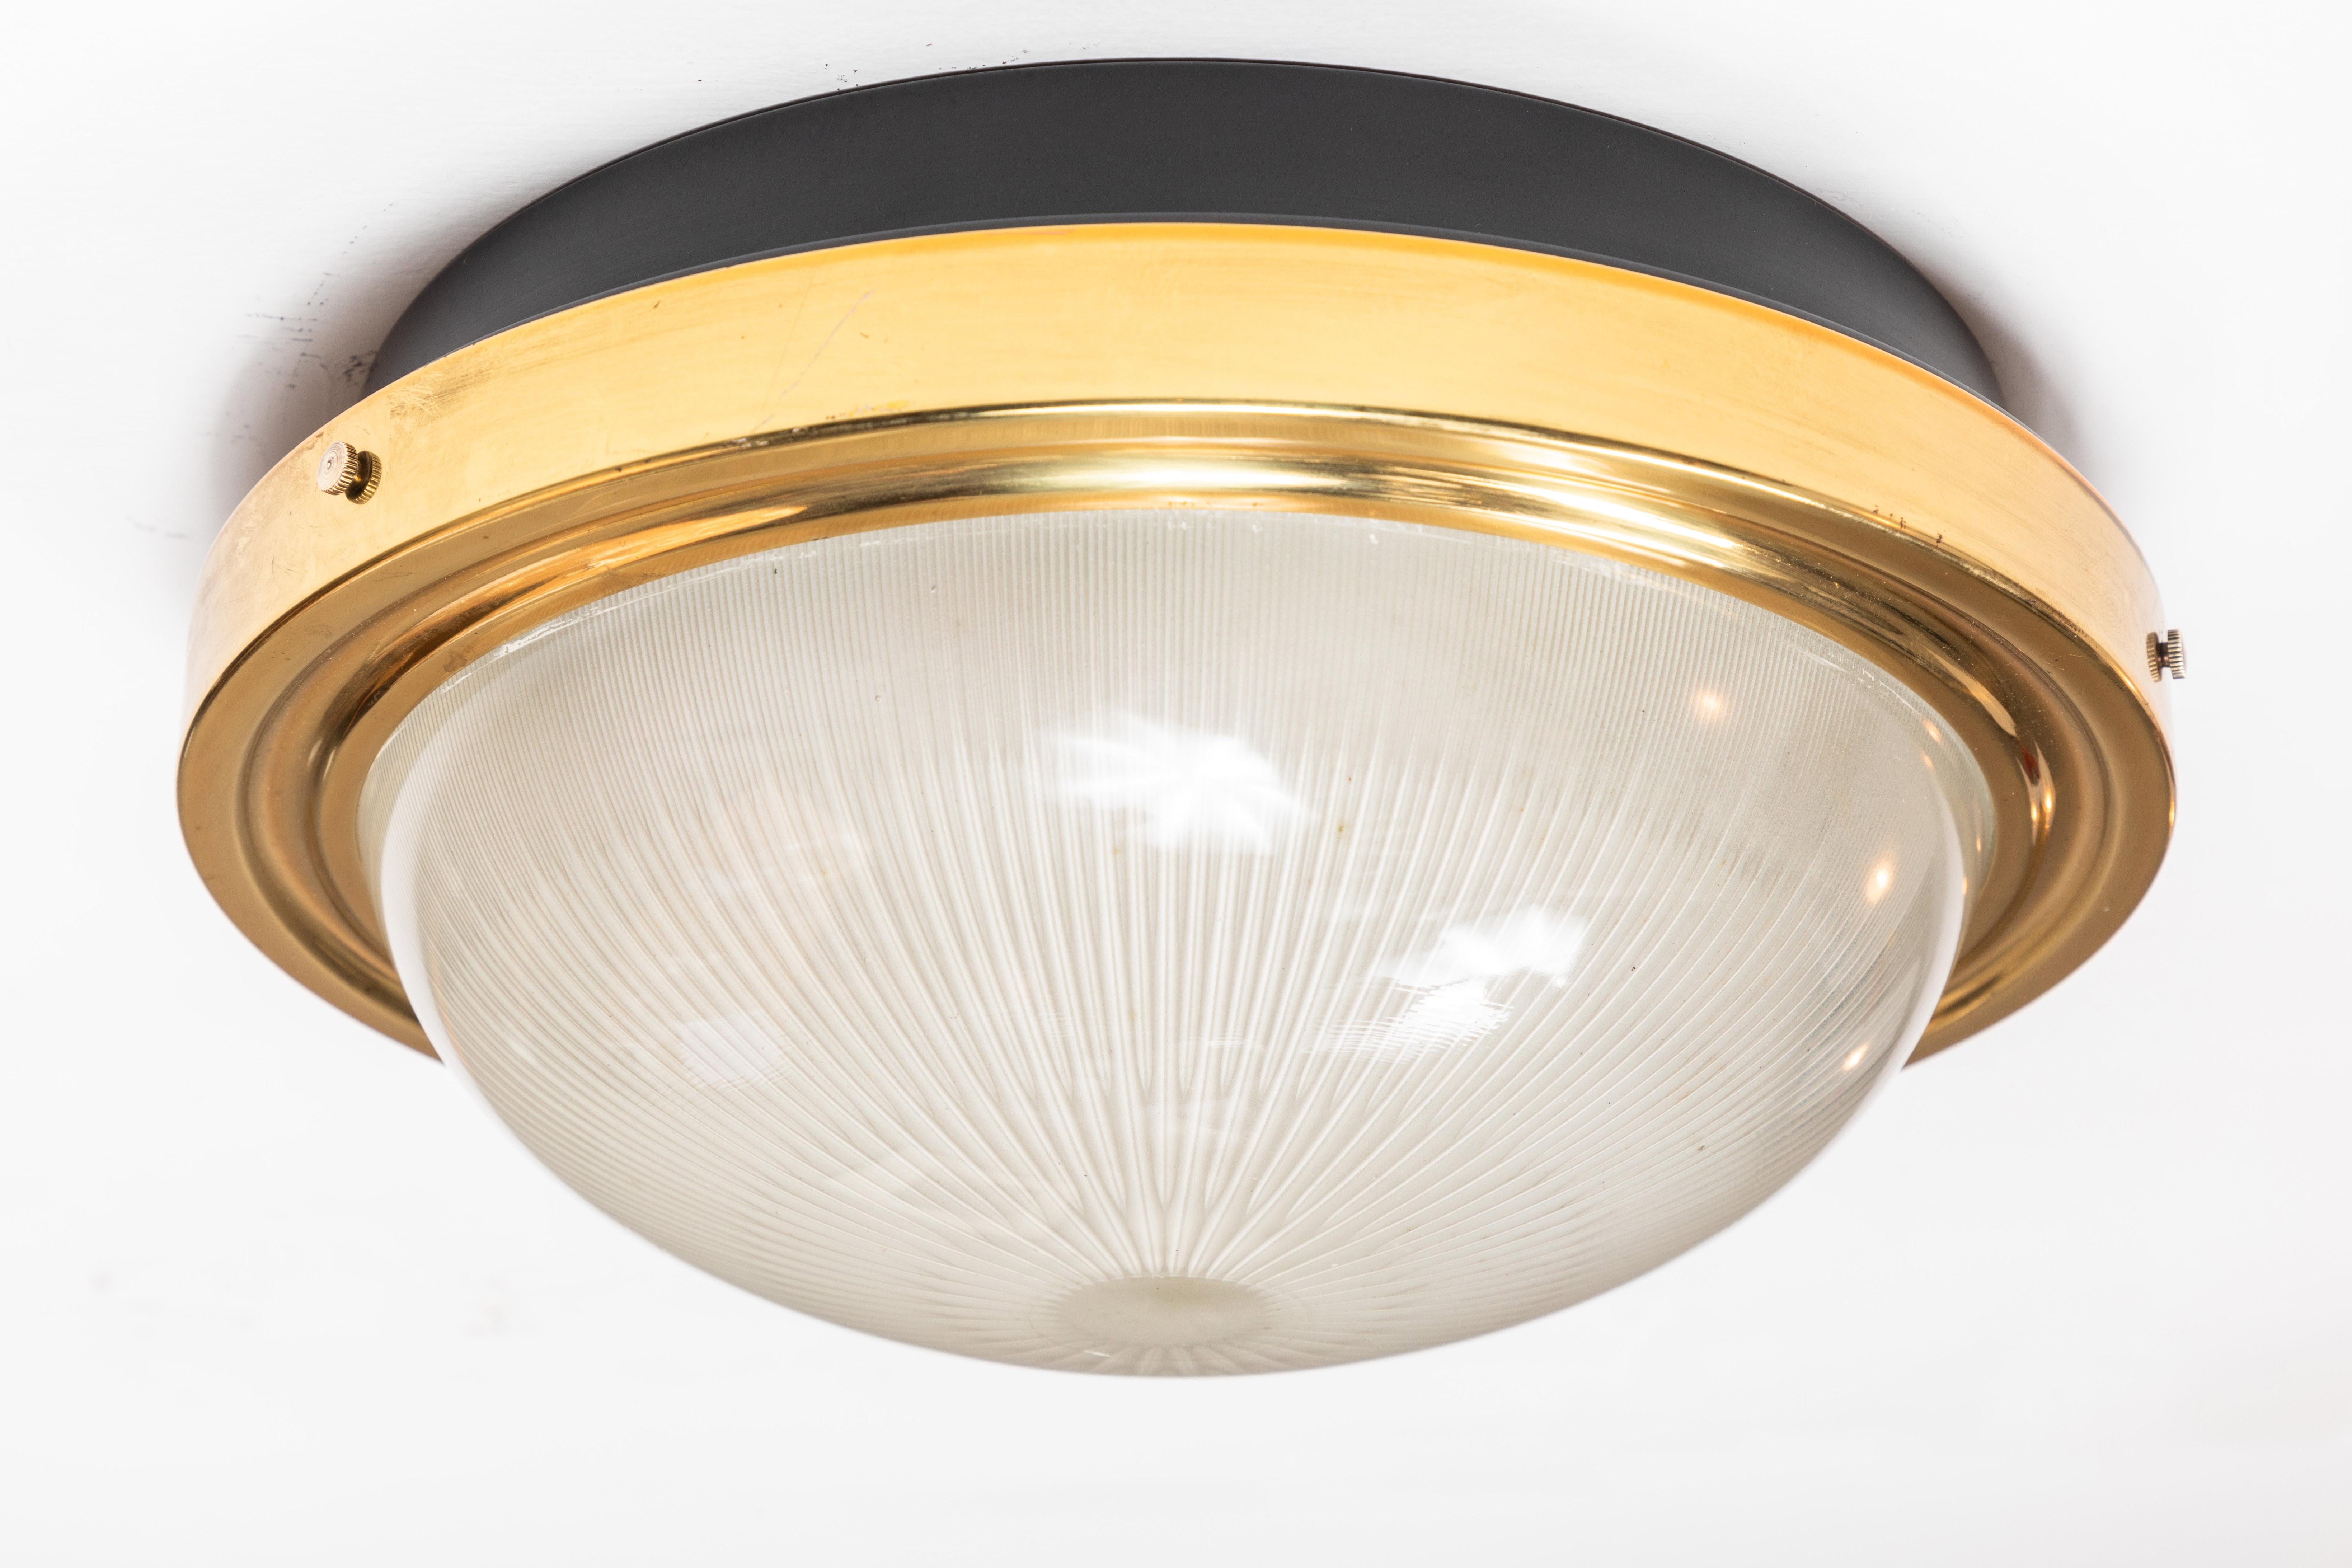 Italian 1960s Sergio Mazza Brass and Glass Wall or Ceiling Light for Artemide